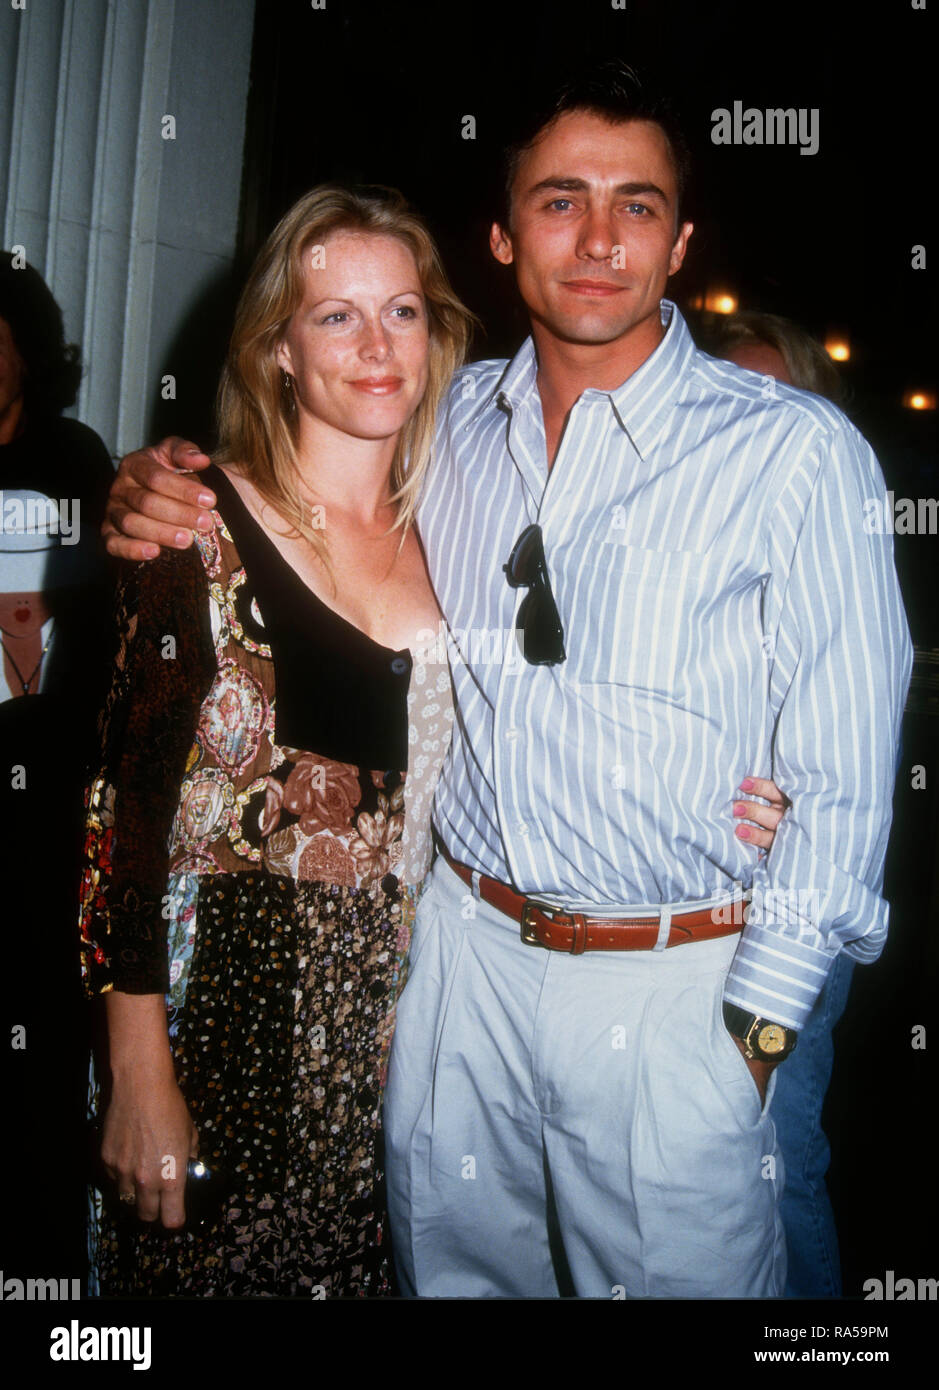 HOLLYWOOD, CA - JULY 14: Actor Alex McArthur and wife Tammi Krevi attend  the opening night of Will Rogers Follies on July 14, 1993 at The Pantages  Theatre in Hollywood, California. Photo